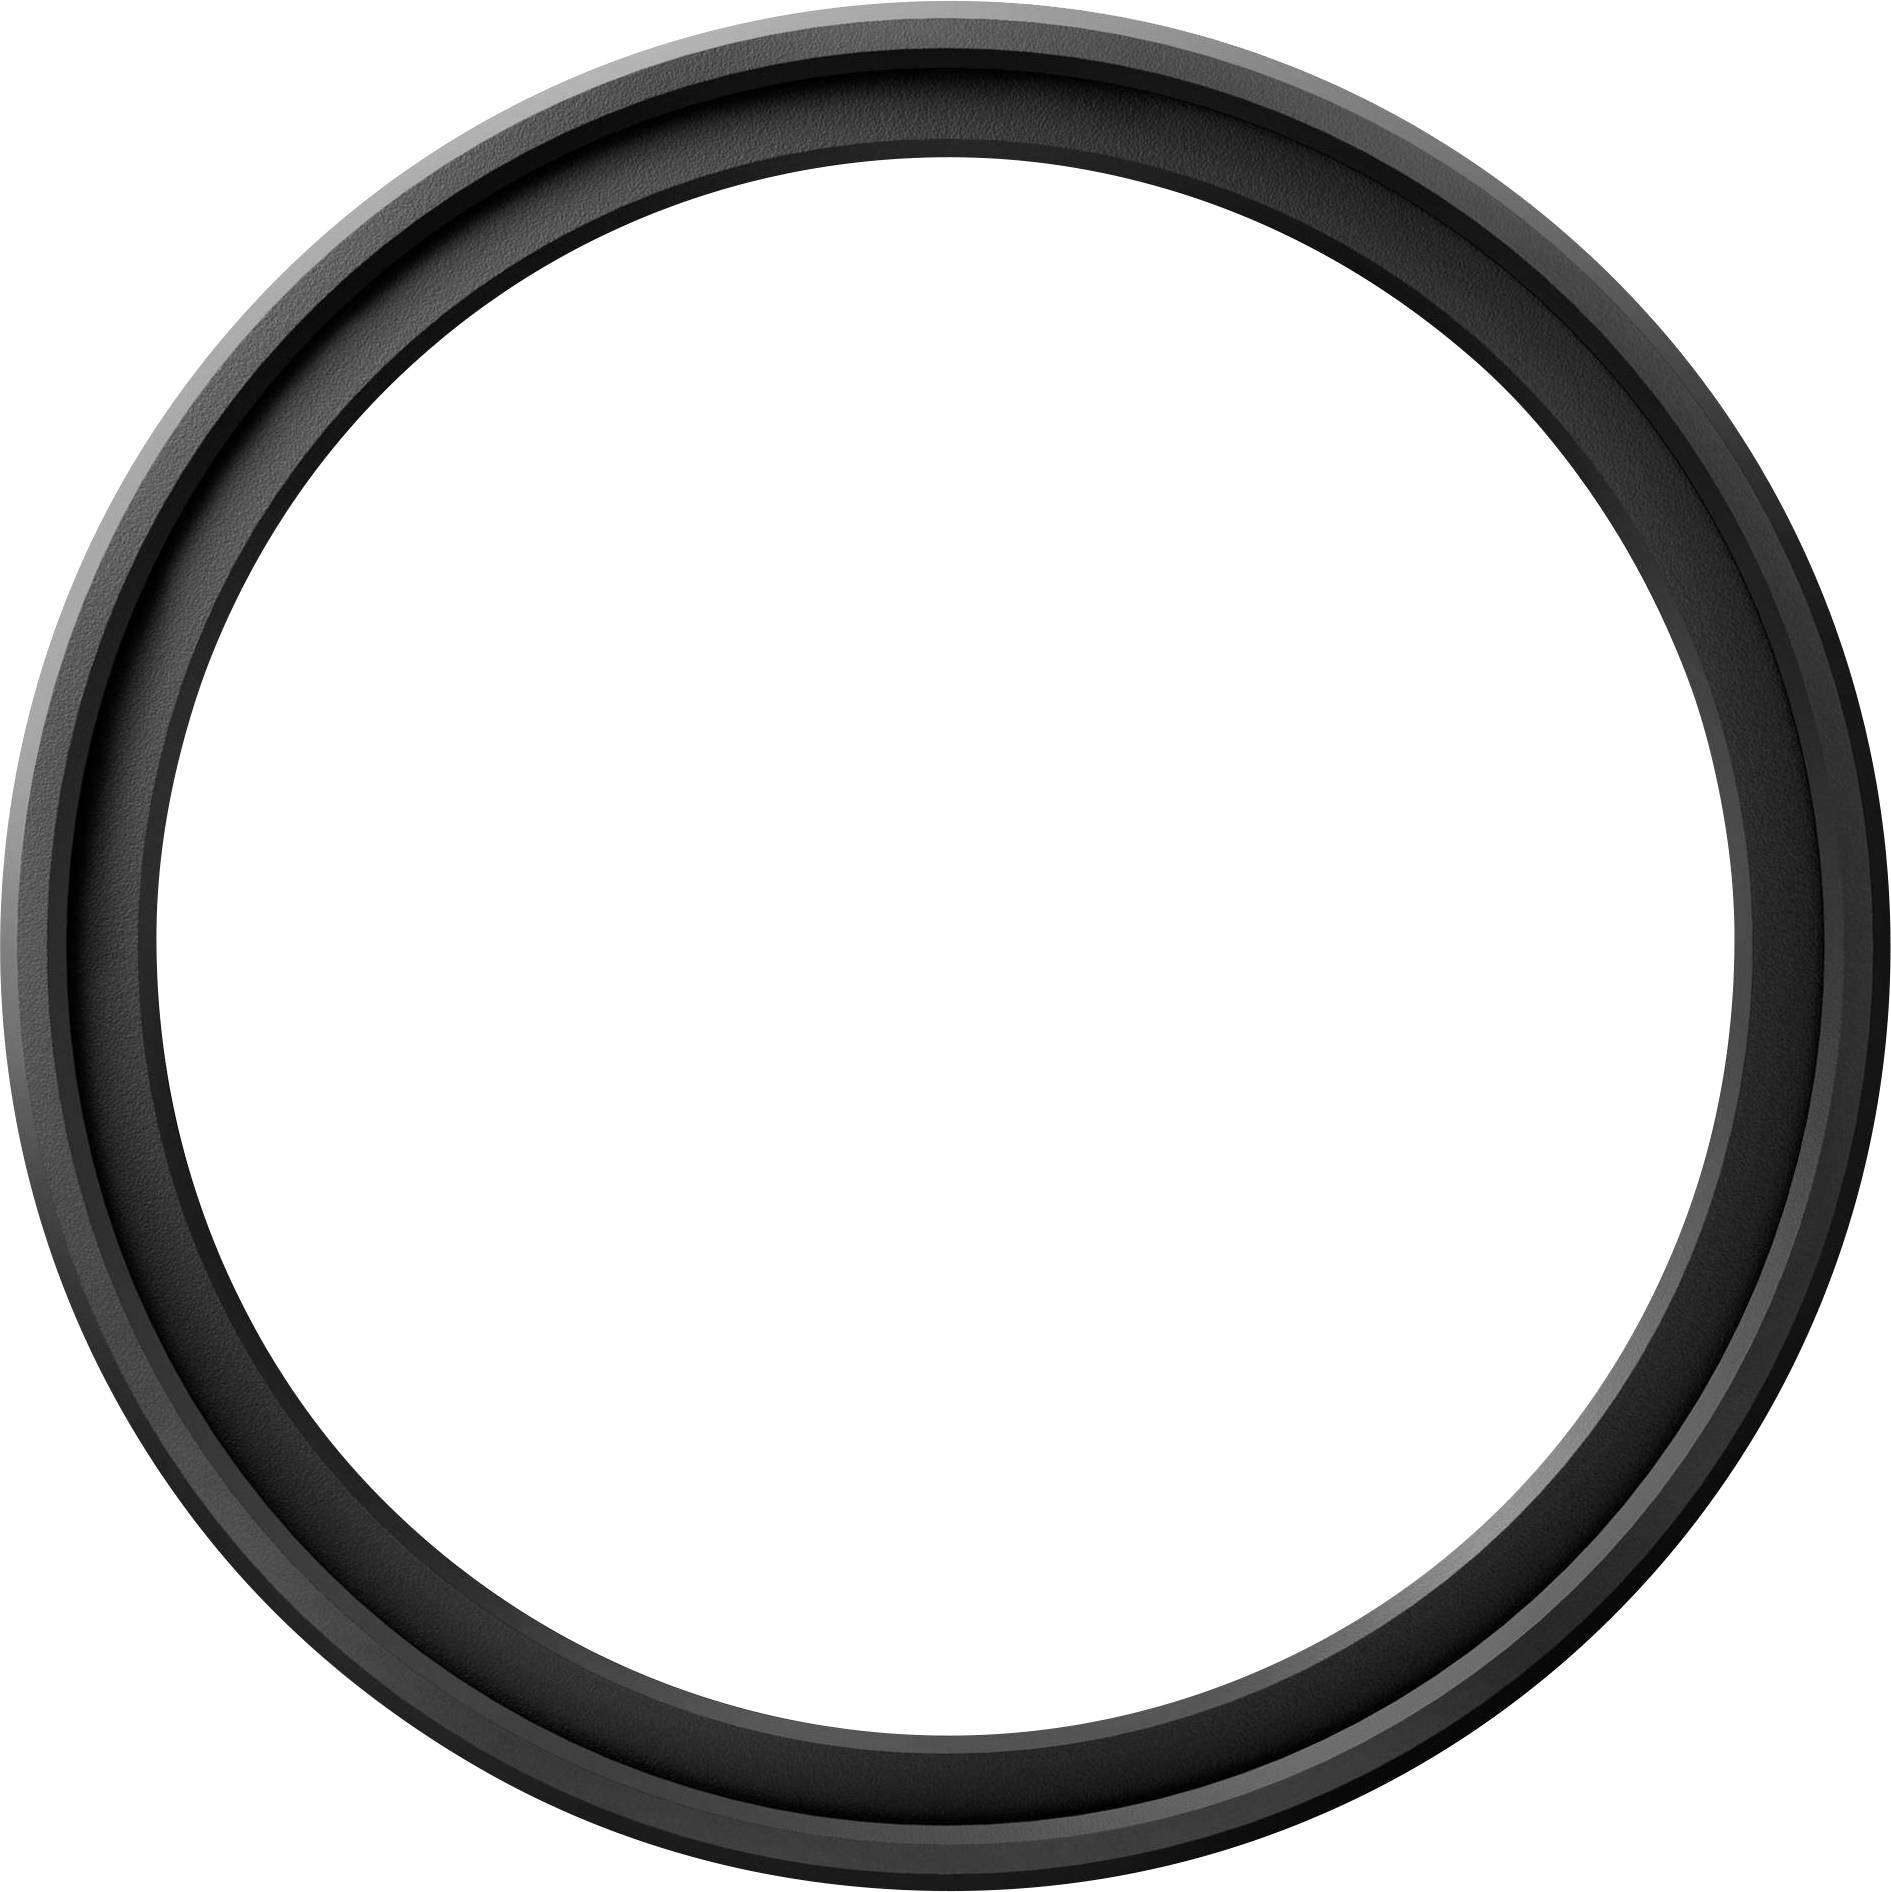 OLYMPUS PRF-D37 PRO Protection Filter